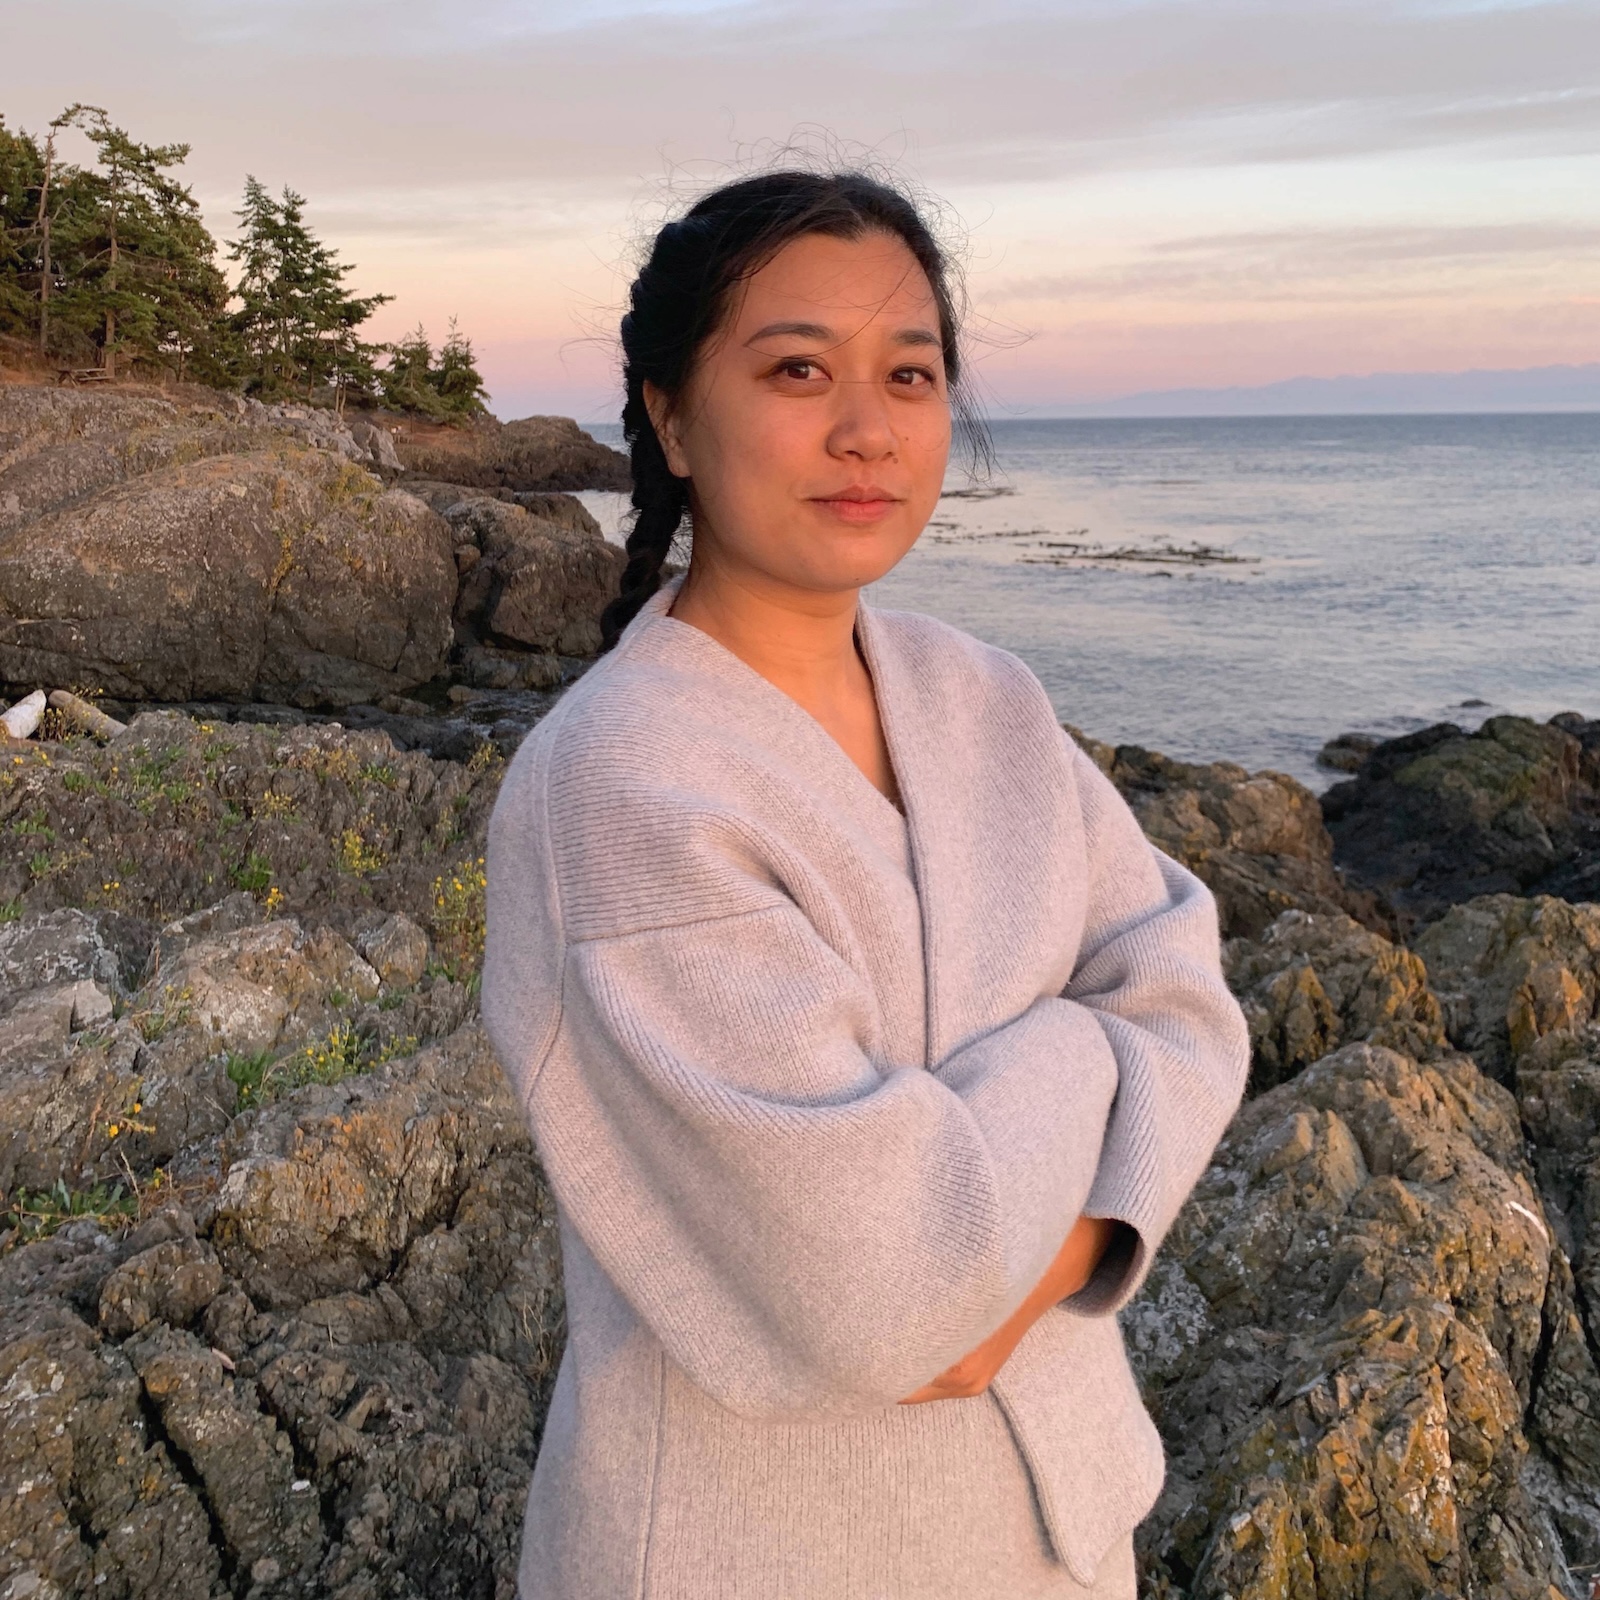 A young Asian woman stands in front of a rocky shoreline with pine trees in the left background and the ocean in the right, and she smiles at the camera and looks content, her arms crossed over her chest, and her body covered in a comfy grey sweater.